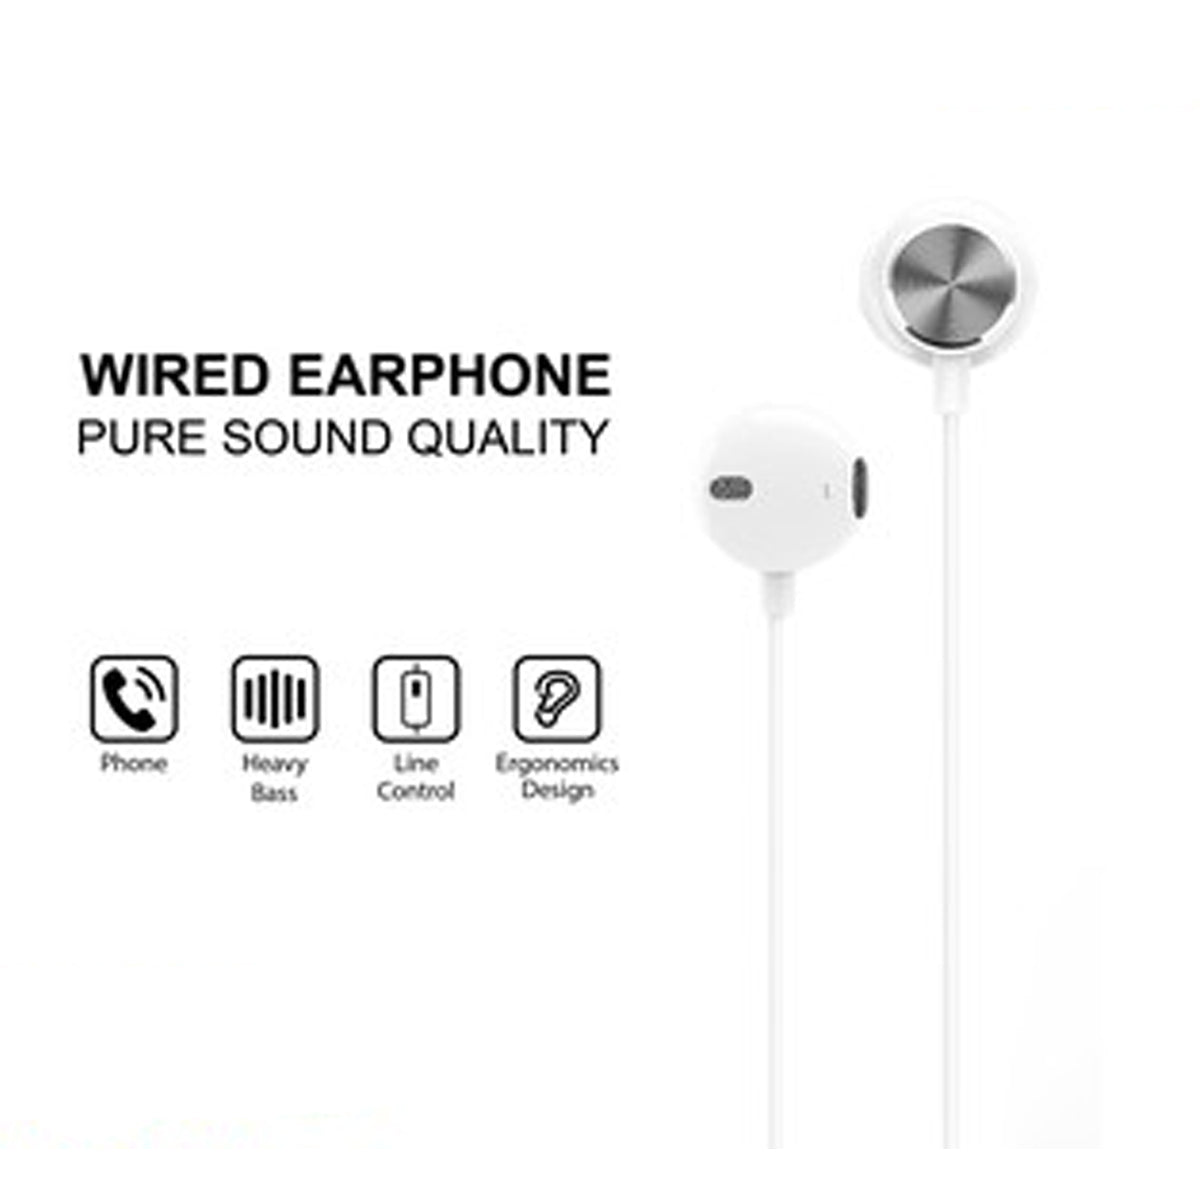 Shop and buy Recci REP-L01 3.5mm Wired Earphone with Microphone 120cm Pure sound quality Heavy bass Line control| Casefactorie® online with great deals and sales prices with fast and safe shipping. Casefactorie is the largest Singapore official authorised retailer for the largest collection of mobile premium accessories.